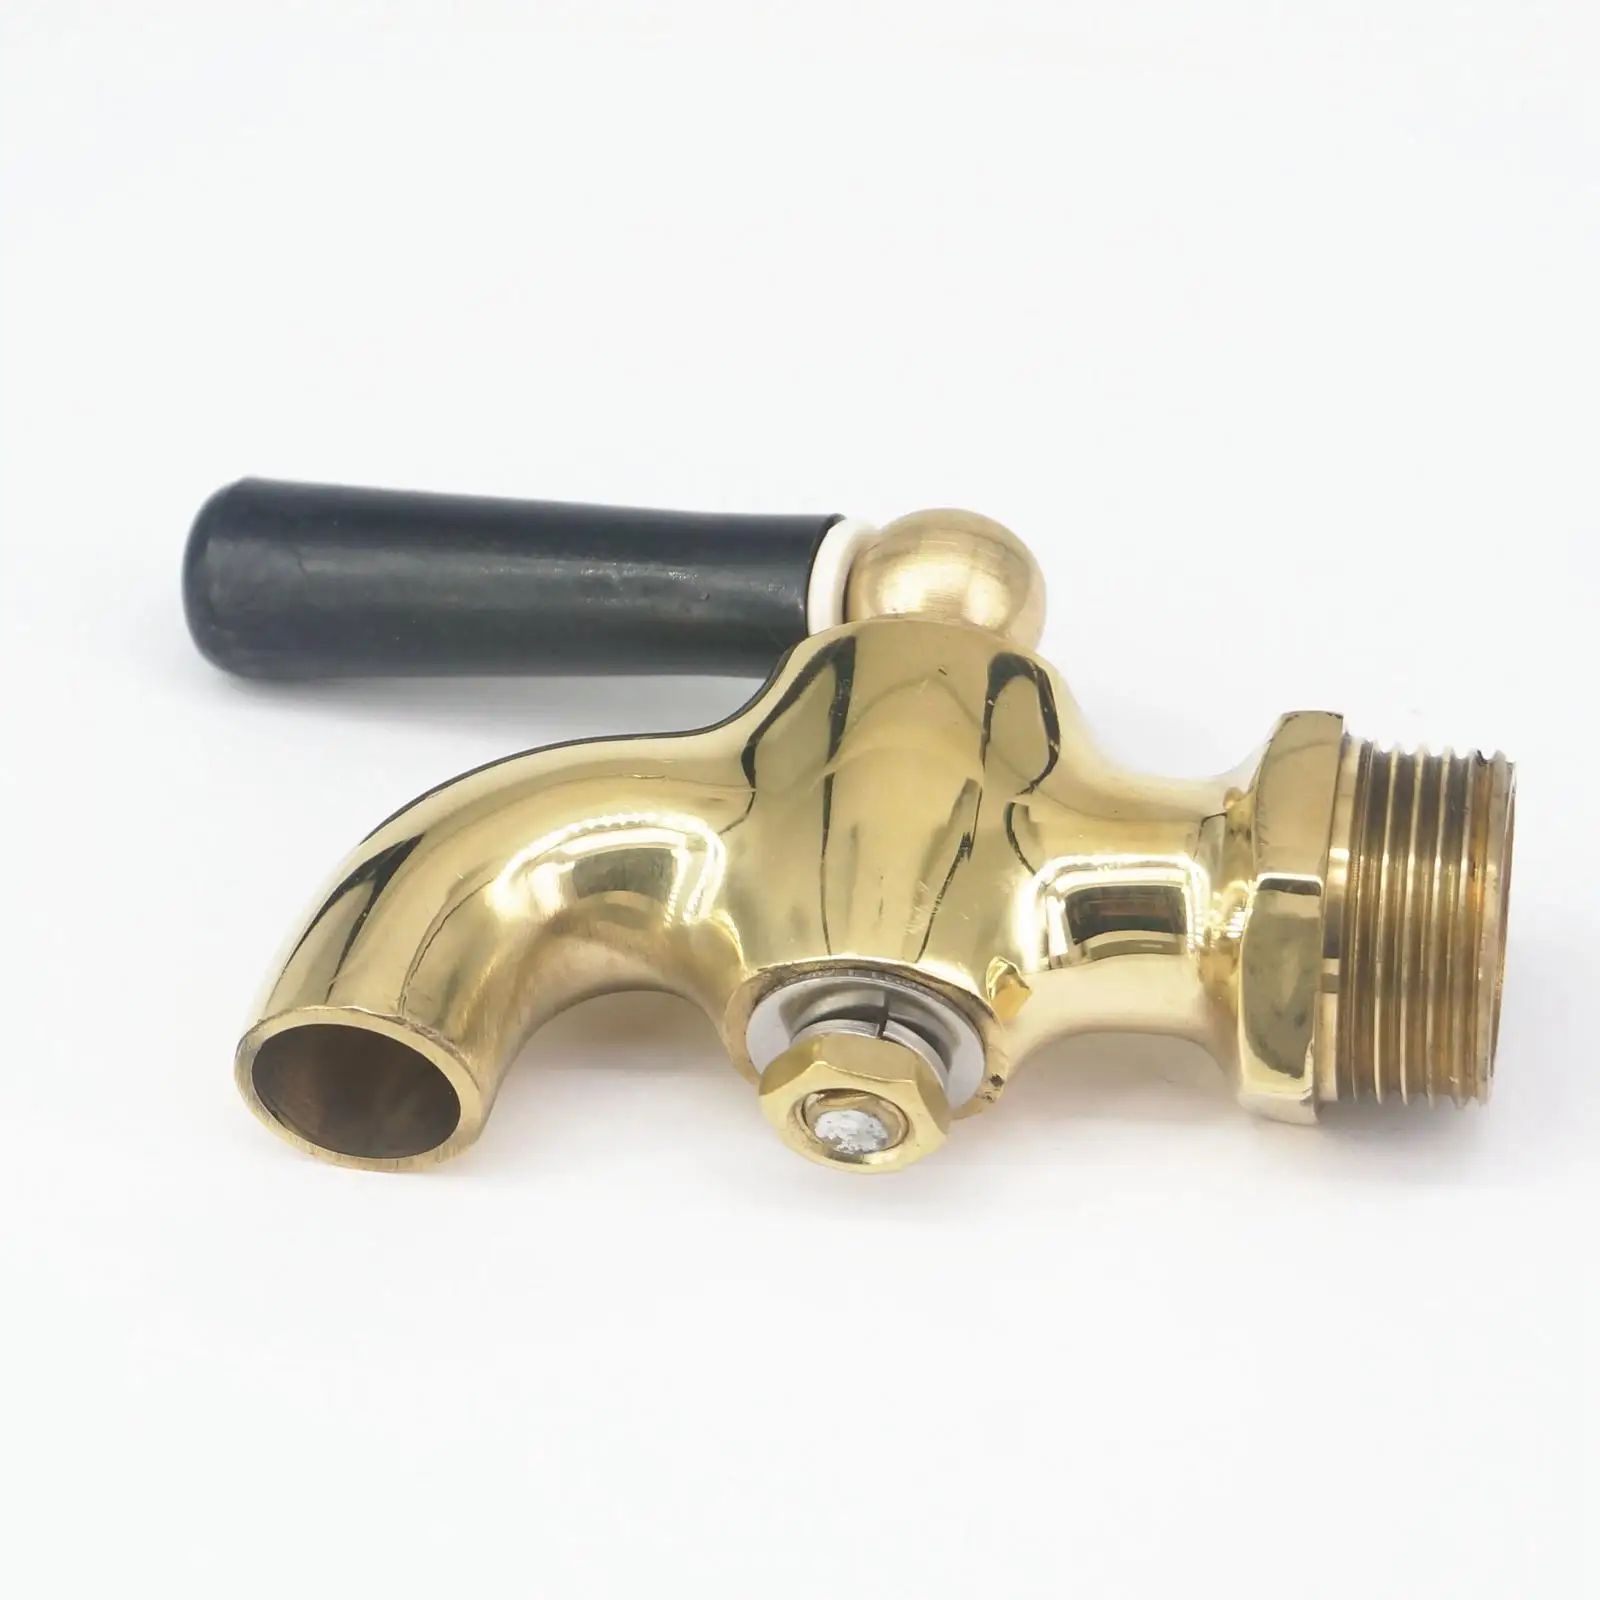 Specification : DN15, Thread Type : BSP qfkj Valves 1pc Copper Plumbing Valve Wall Outlet Male G1/2 Black Faucets Shower Brass Angle Valve Bath Bathroom Accessories Piping